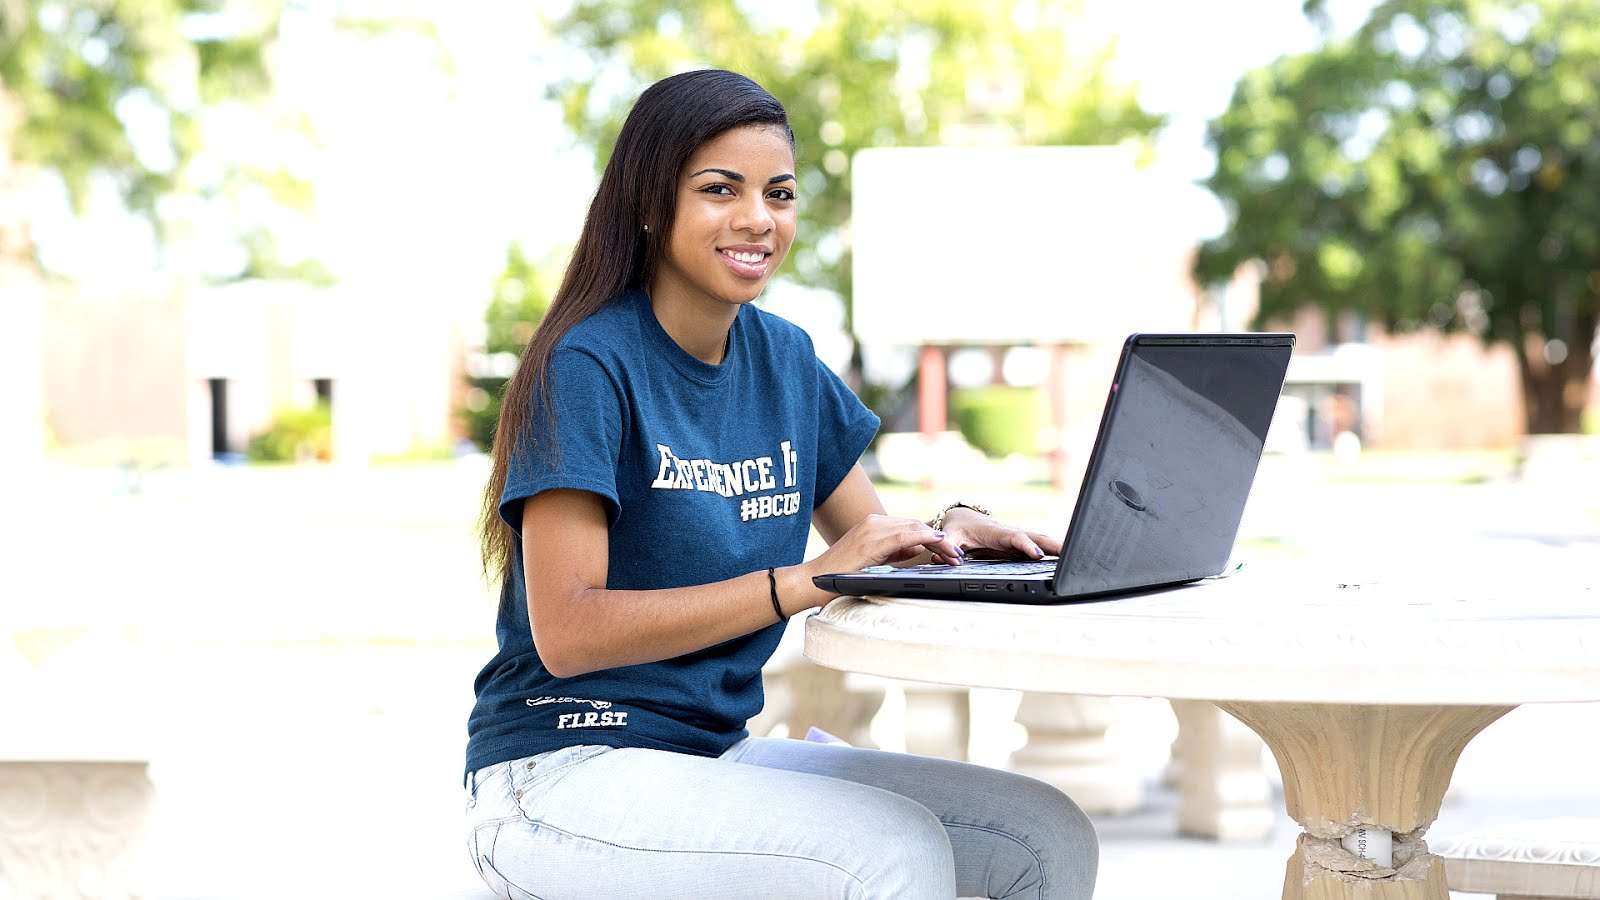 Online Colleges That Provide Laptops